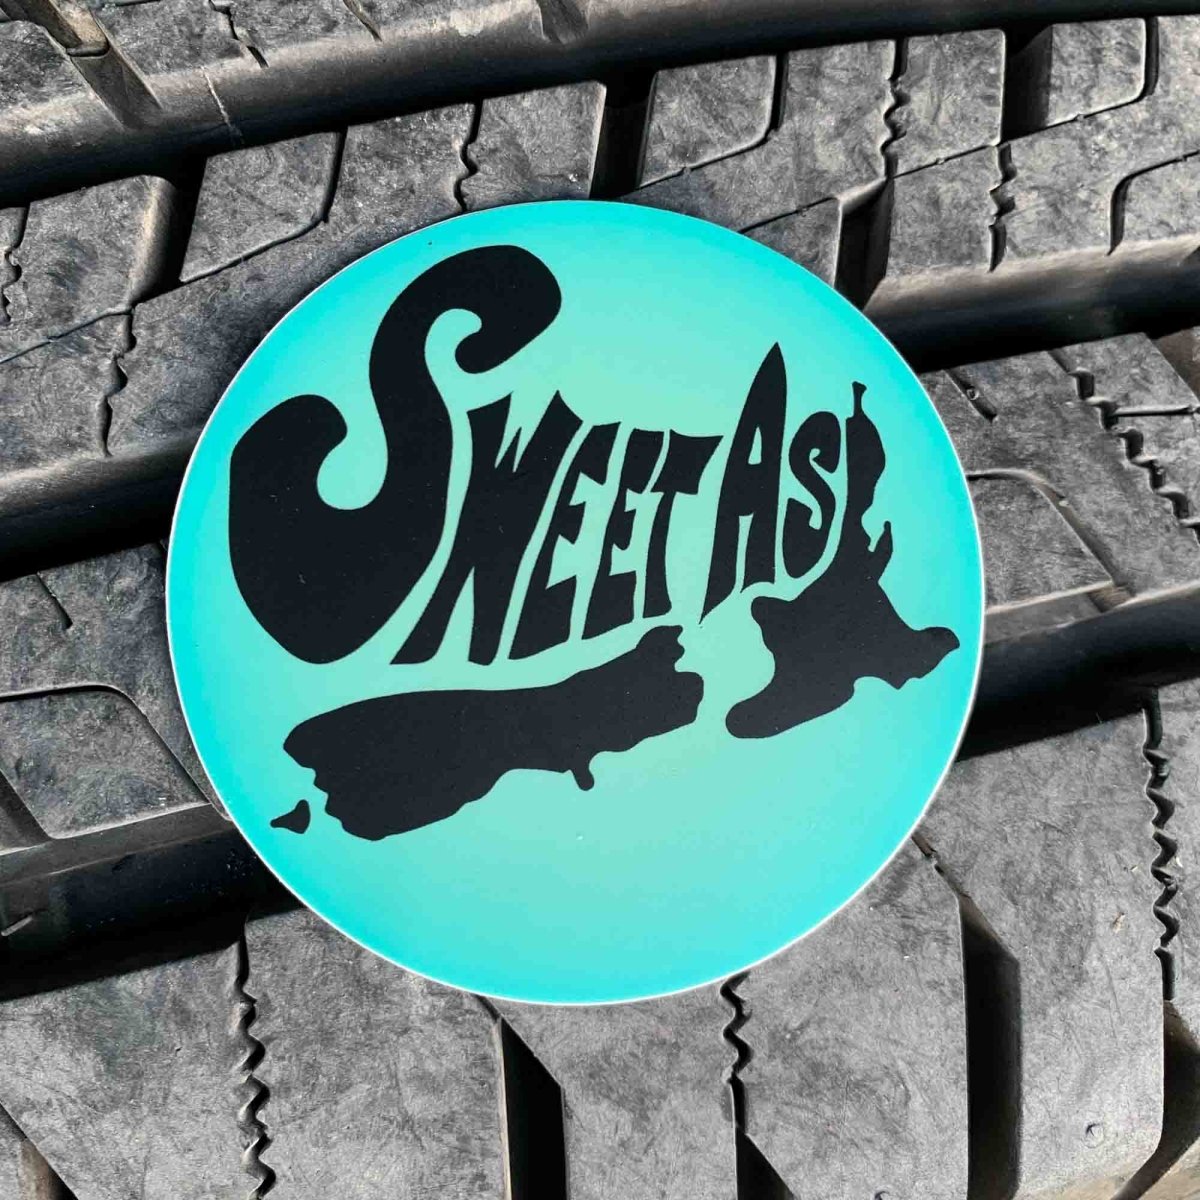 Sweet As Premium Stickers and Magnets, New Zealand, Maori, Lingo, Local or Travel Gift